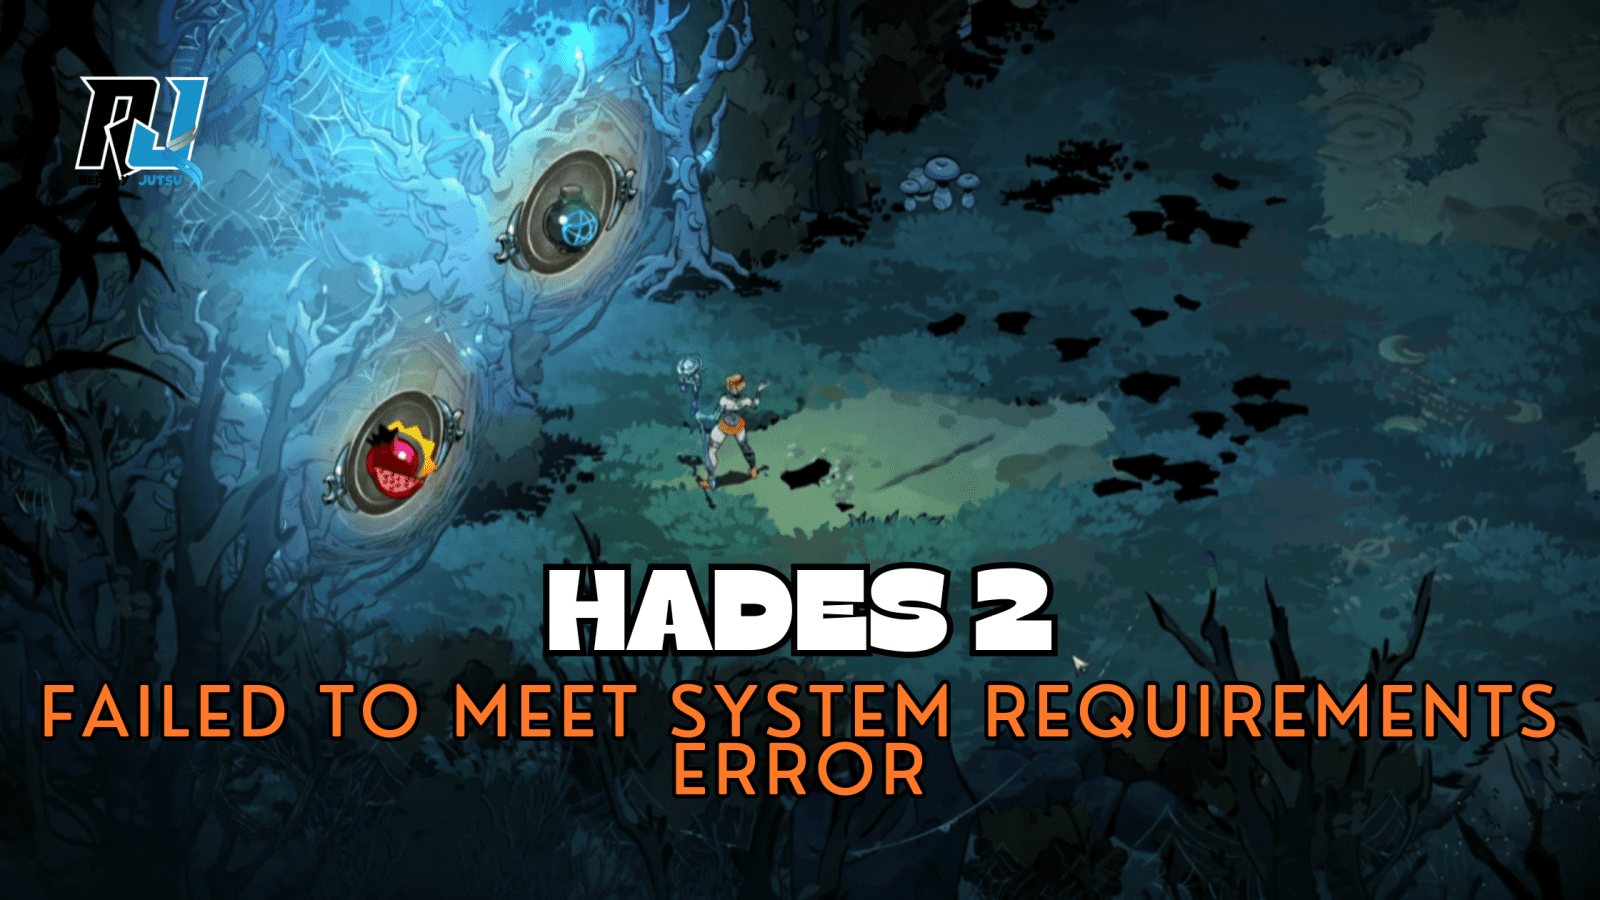 Why Am I Getting Failed to Meet System Requirements Error in Hades 2?